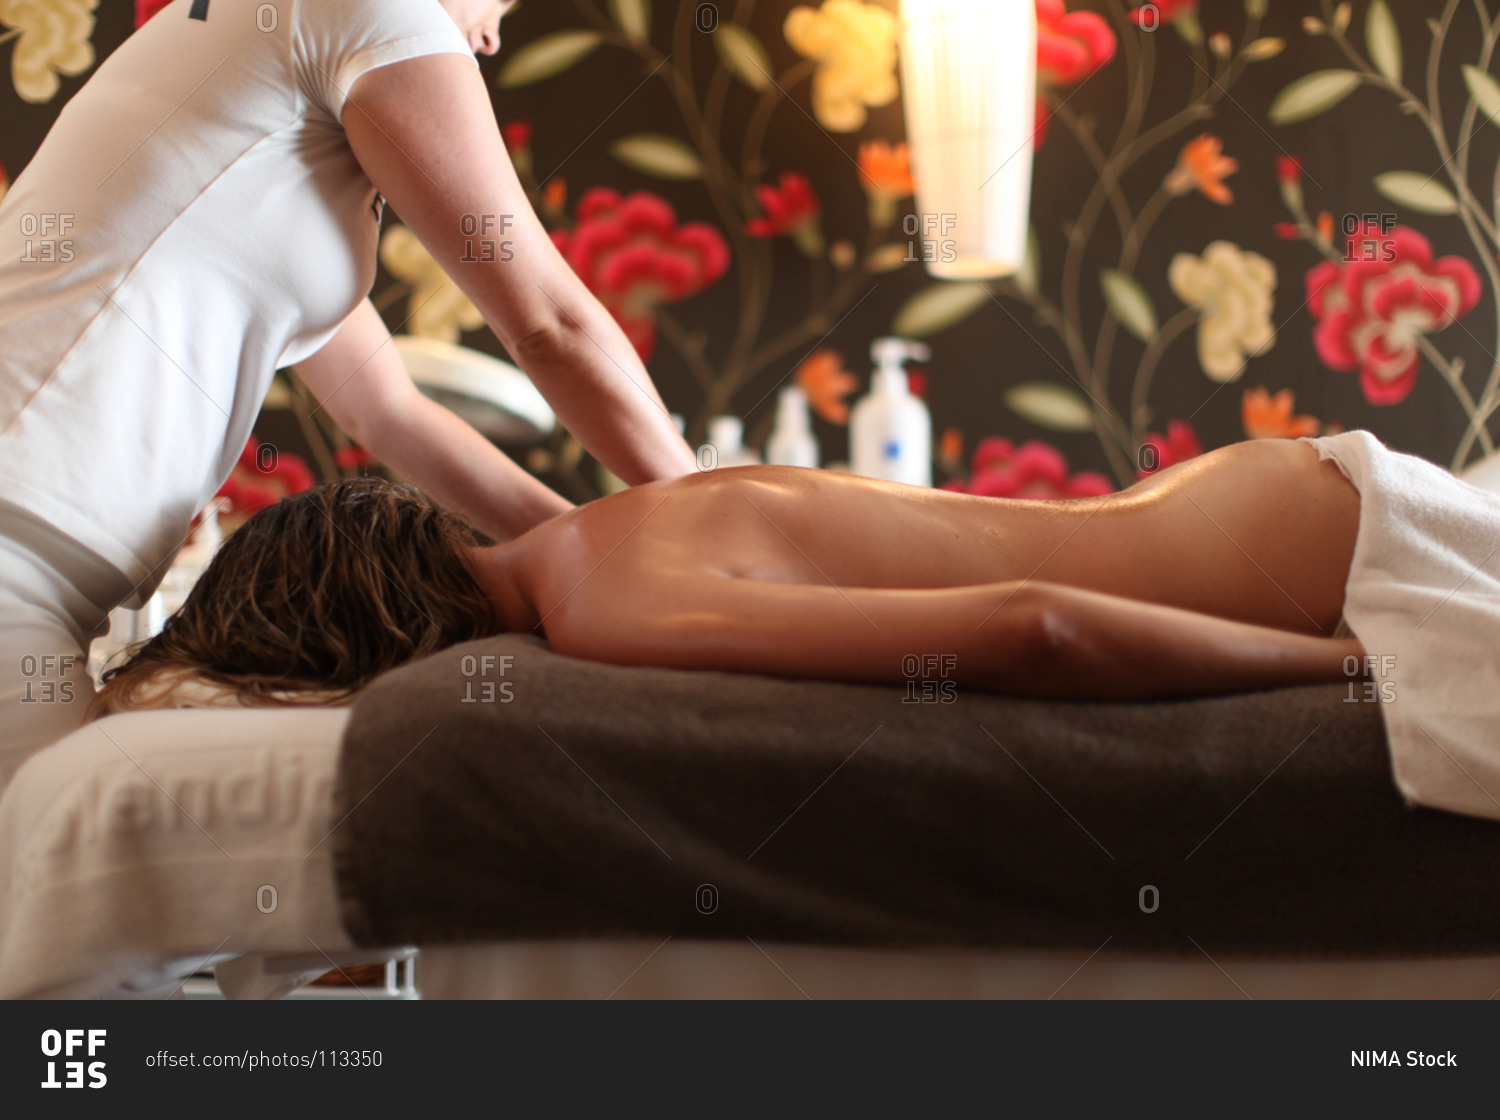 Naked woman receiving back massage from masseur at spa